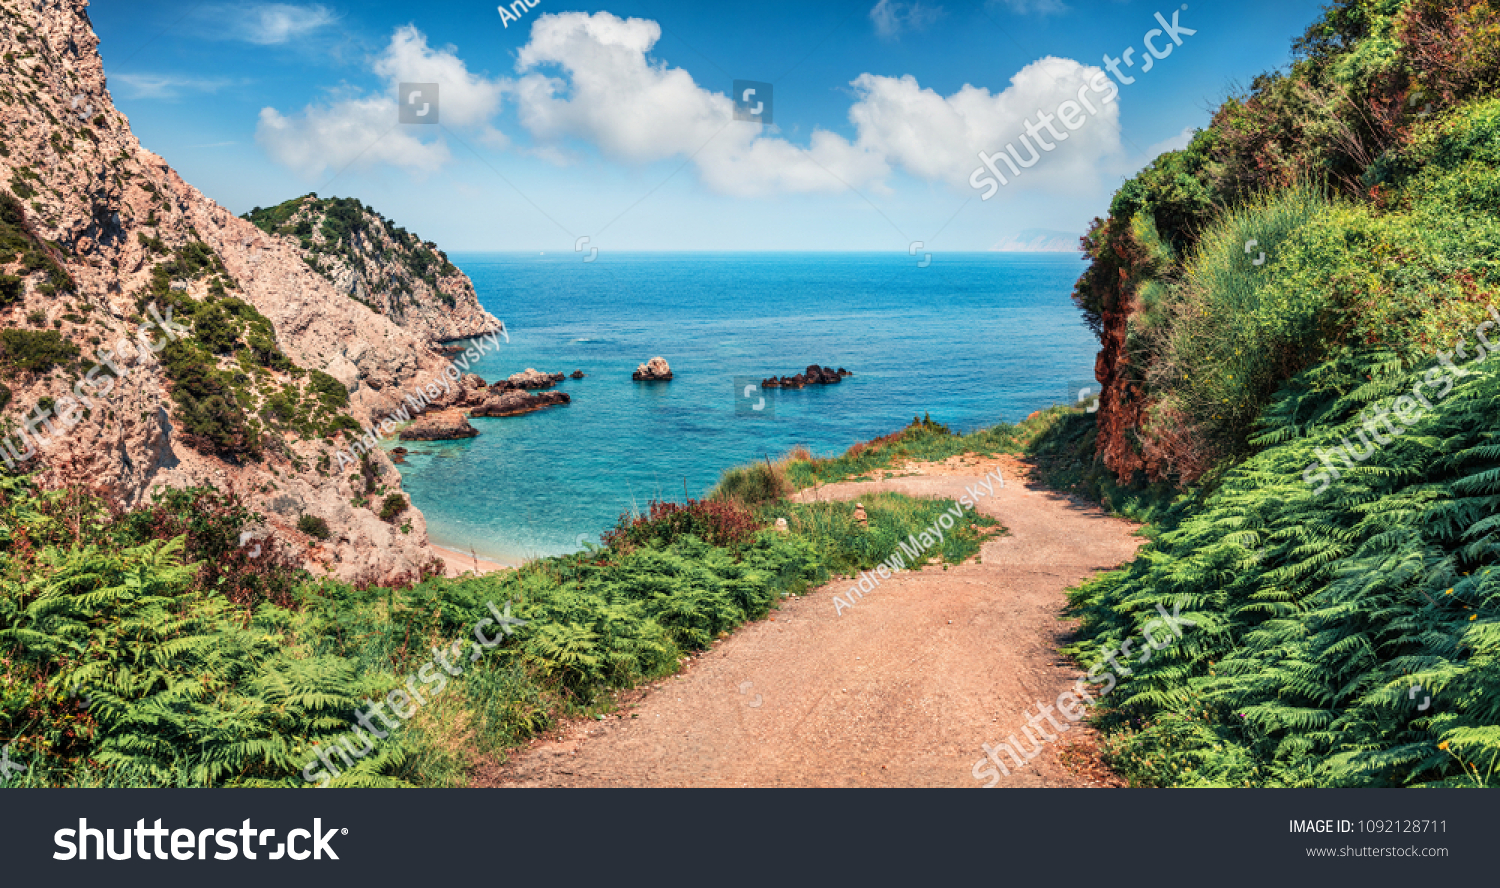 Old road to Agia eleni beach. Colorful morning seascape of Mediterranean Sea. Bright outdoor scene of Cephalonia island, Greece, Europe. Traveling on Ionian Islands.  #1092128711